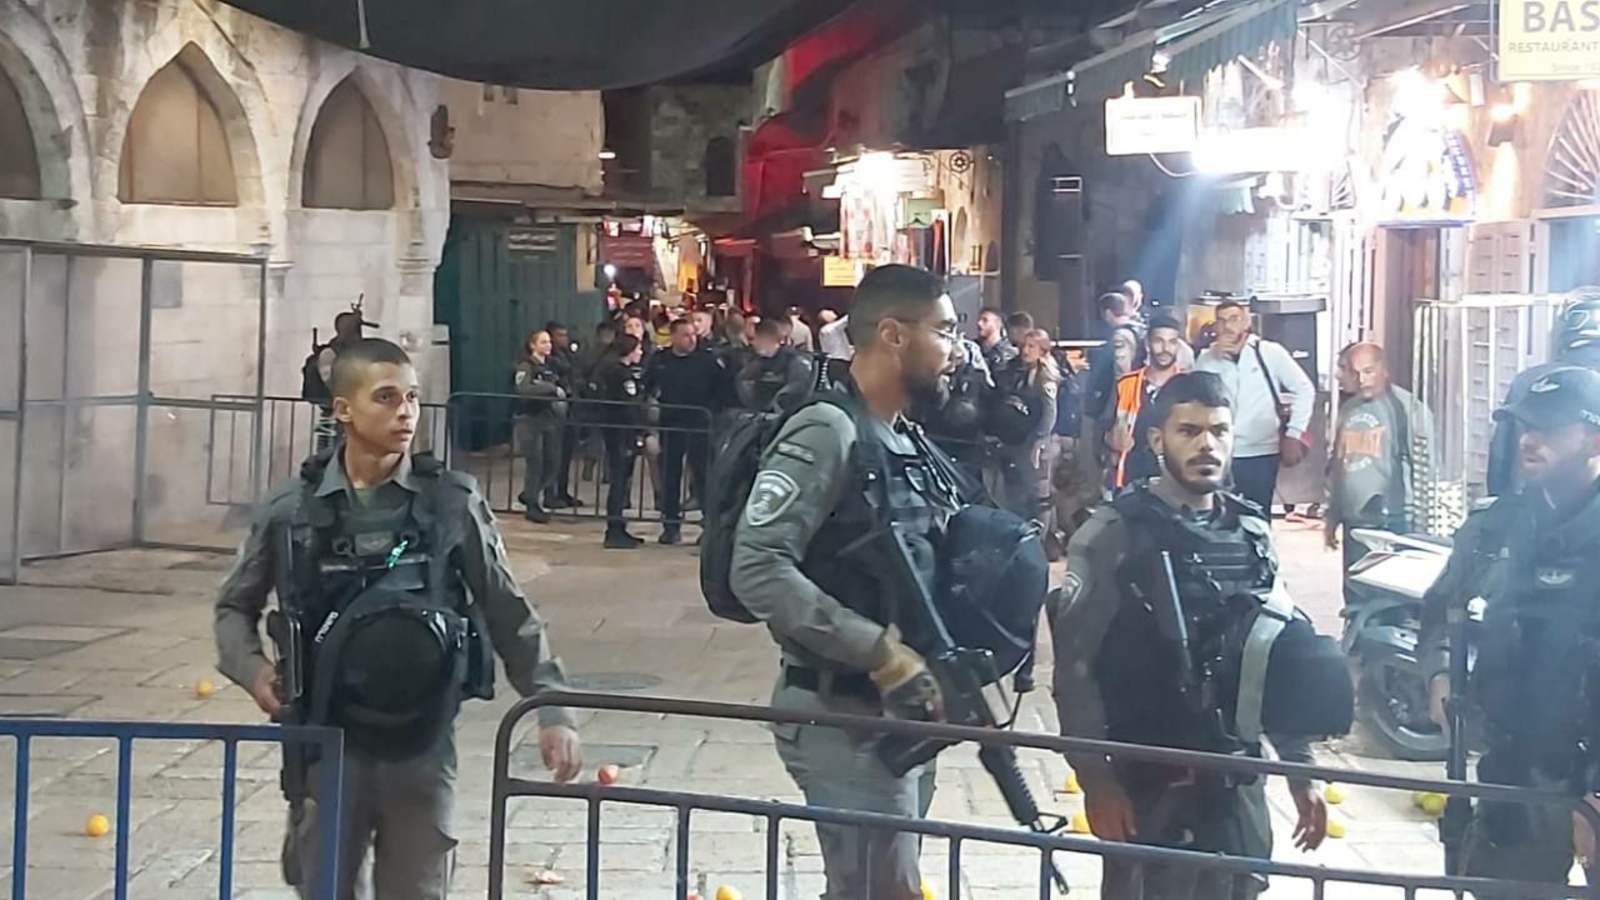 Palestinian Martyred for Allegedly Carrying Out Stabbing Attack